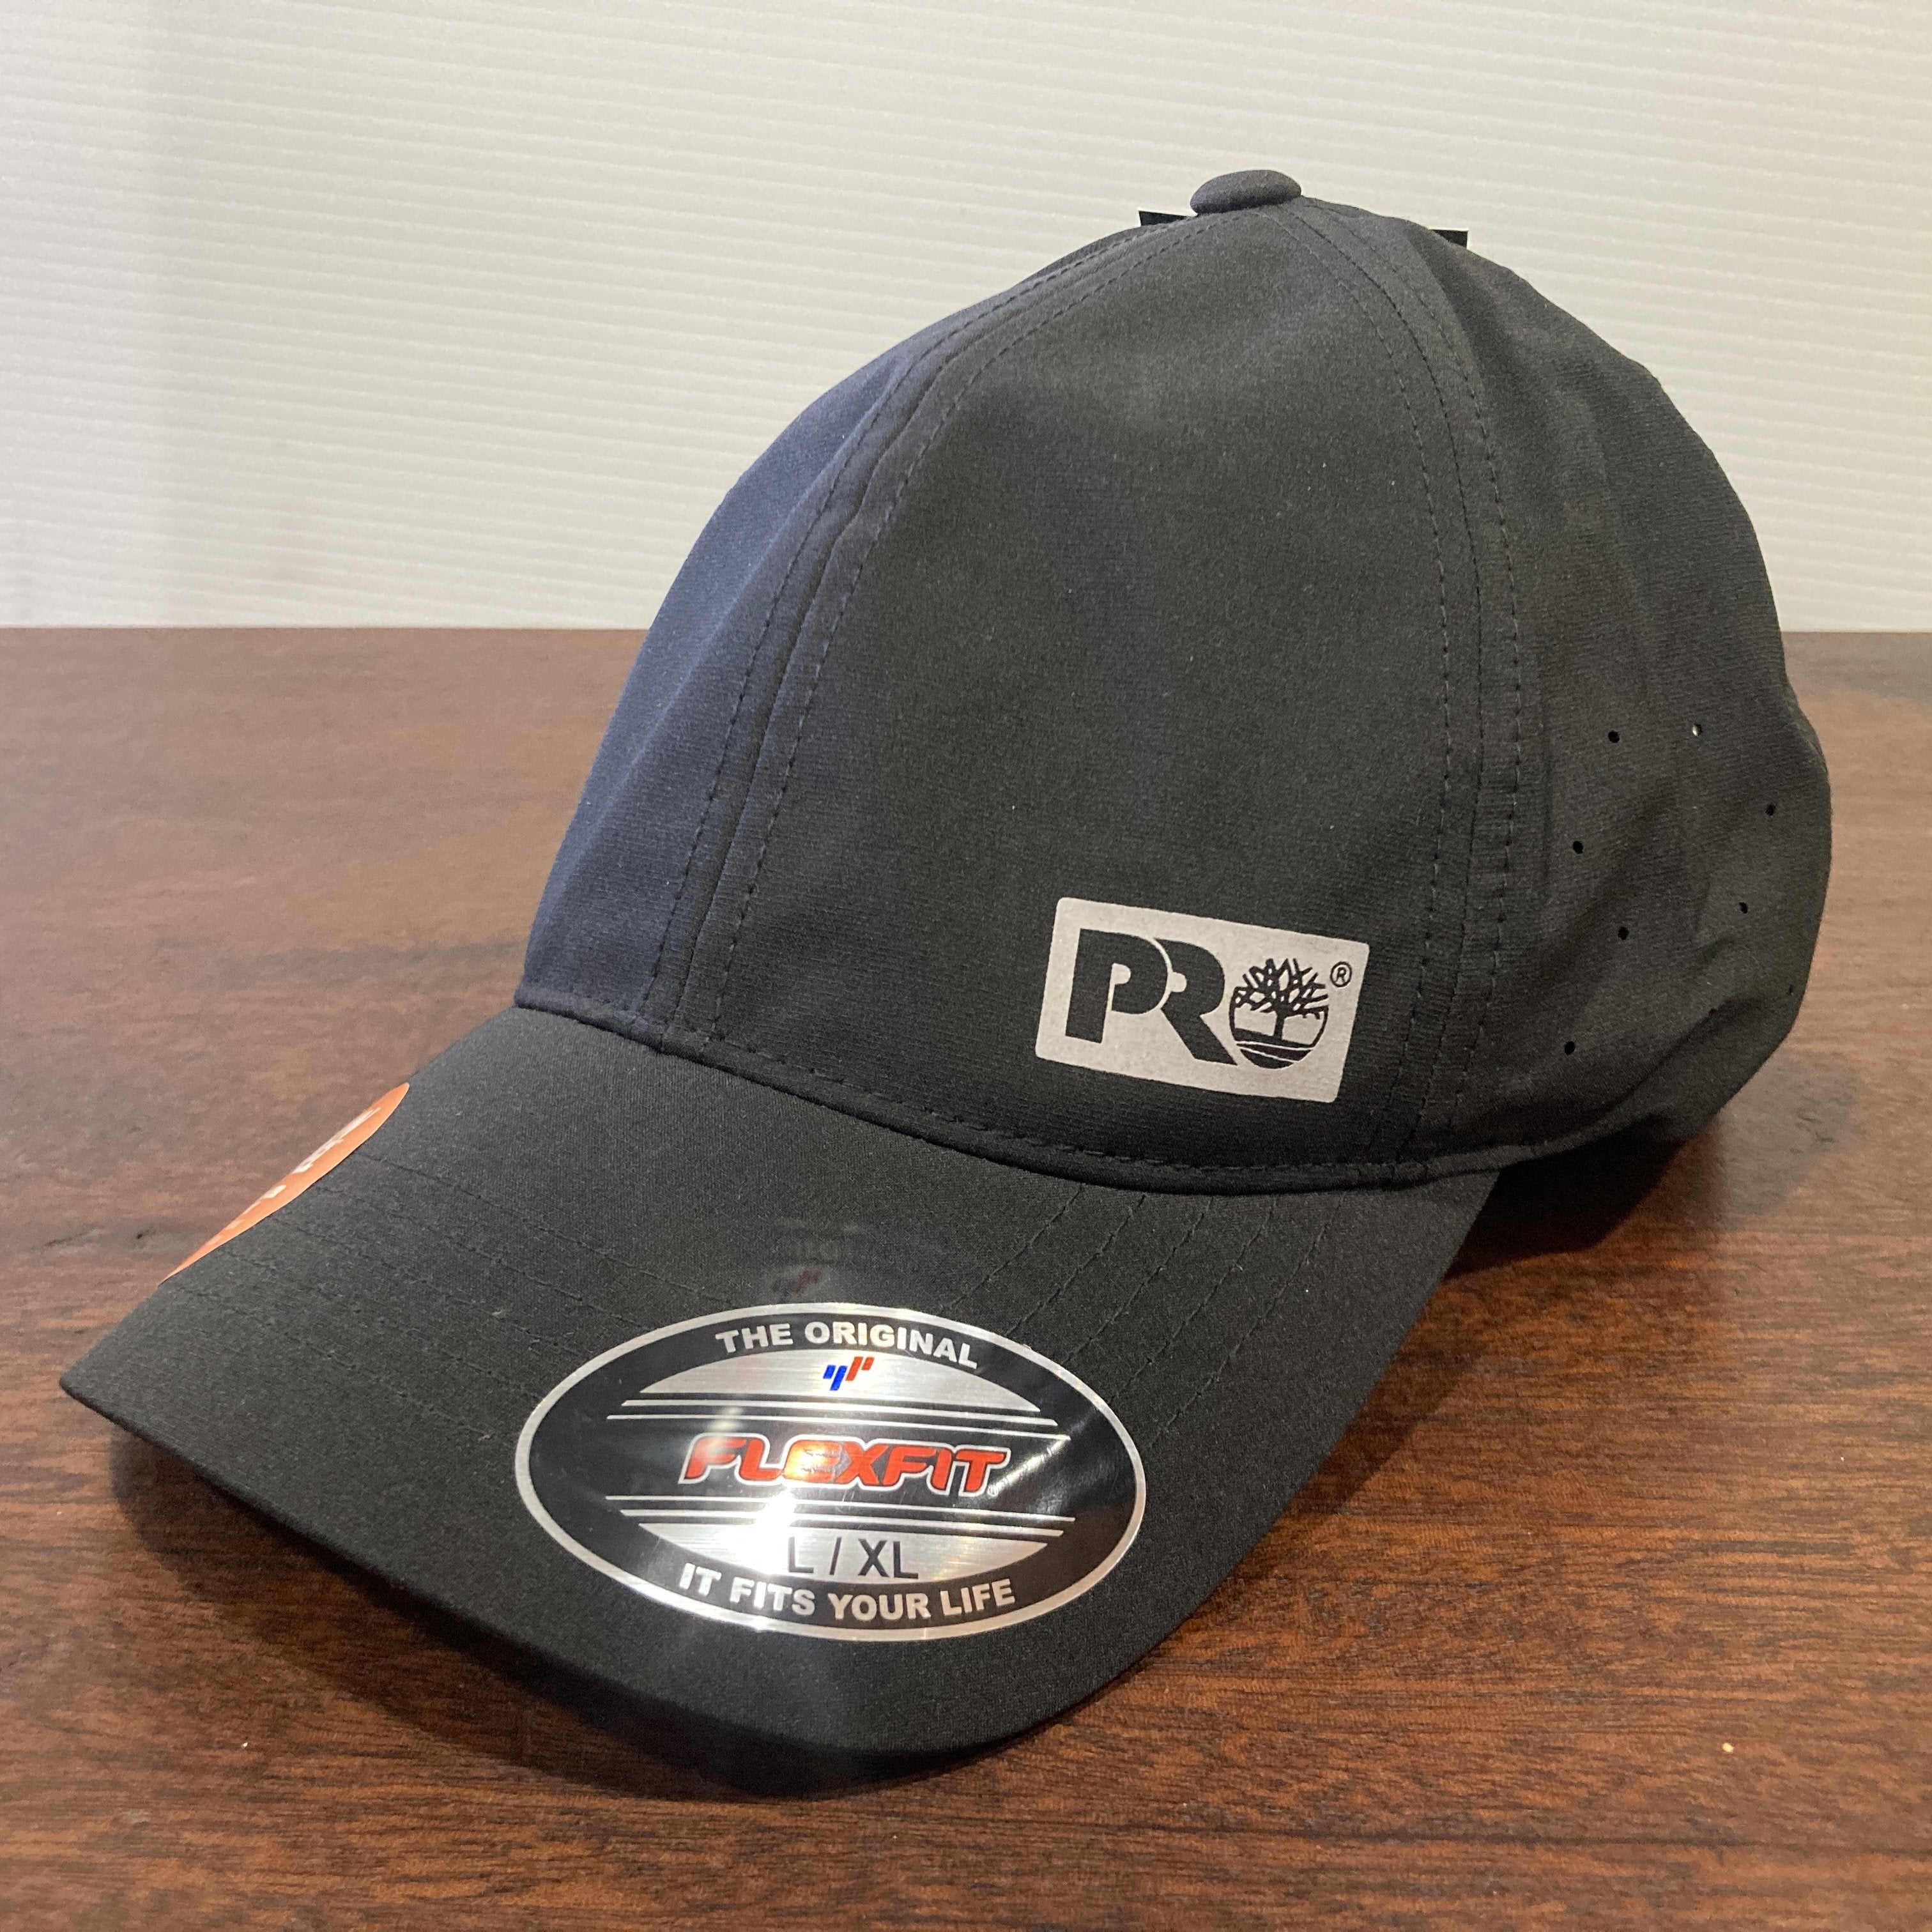 Hat Performance Outfitters Ltd. Timberland – Rose Pro Wind North